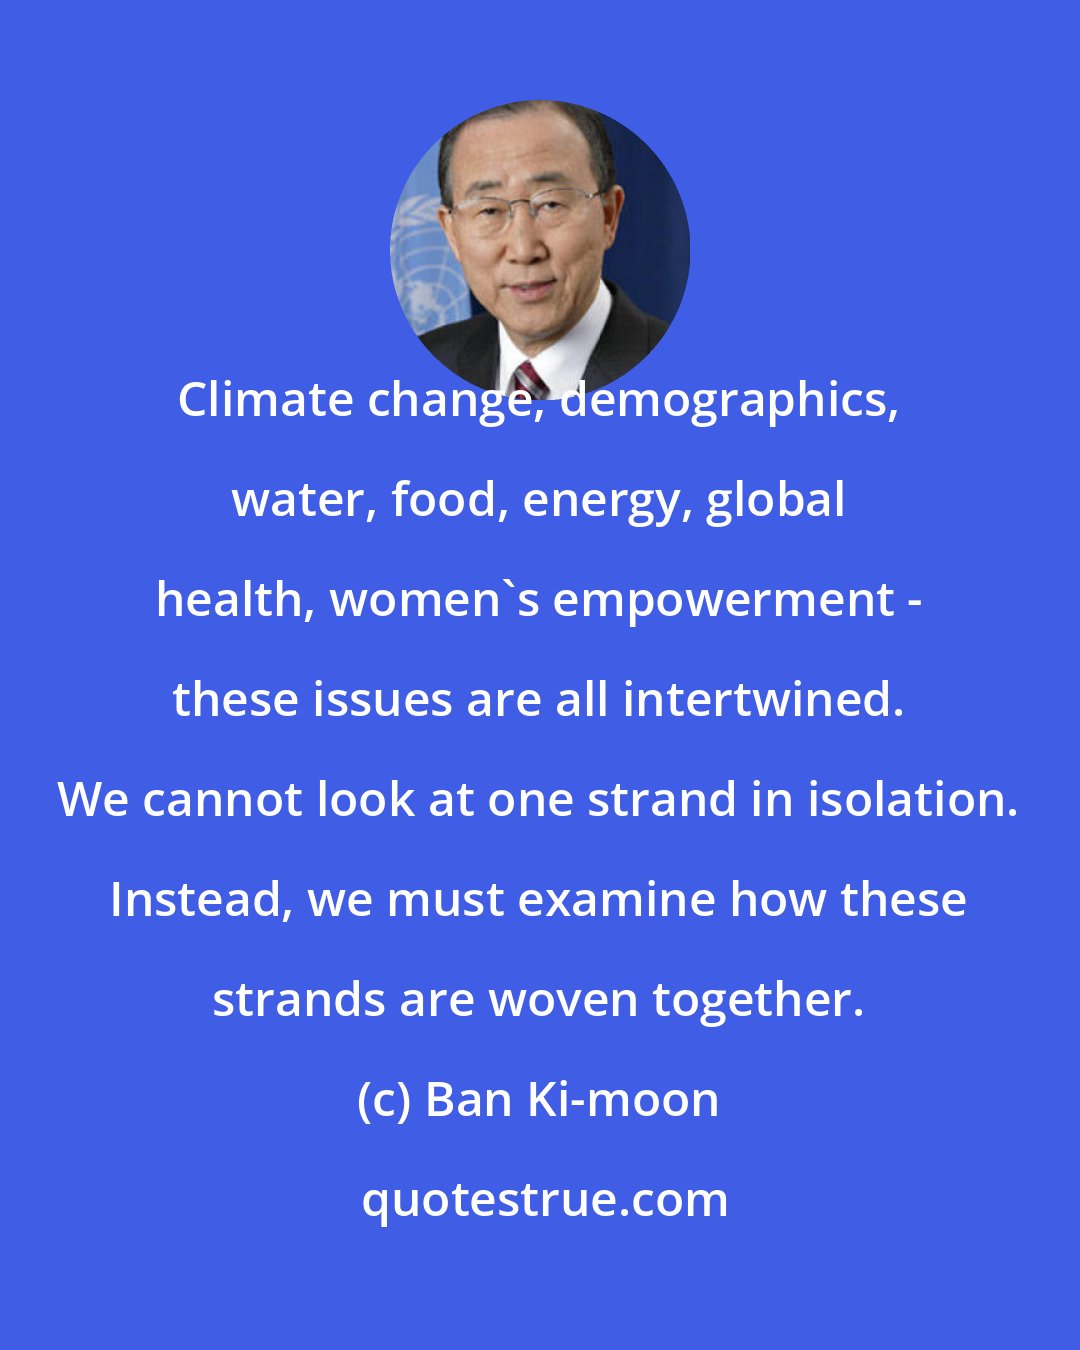 Ban Ki-moon: Climate change, demographics, water, food, energy, global health, women's empowerment - these issues are all intertwined. We cannot look at one strand in isolation. Instead, we must examine how these strands are woven together.